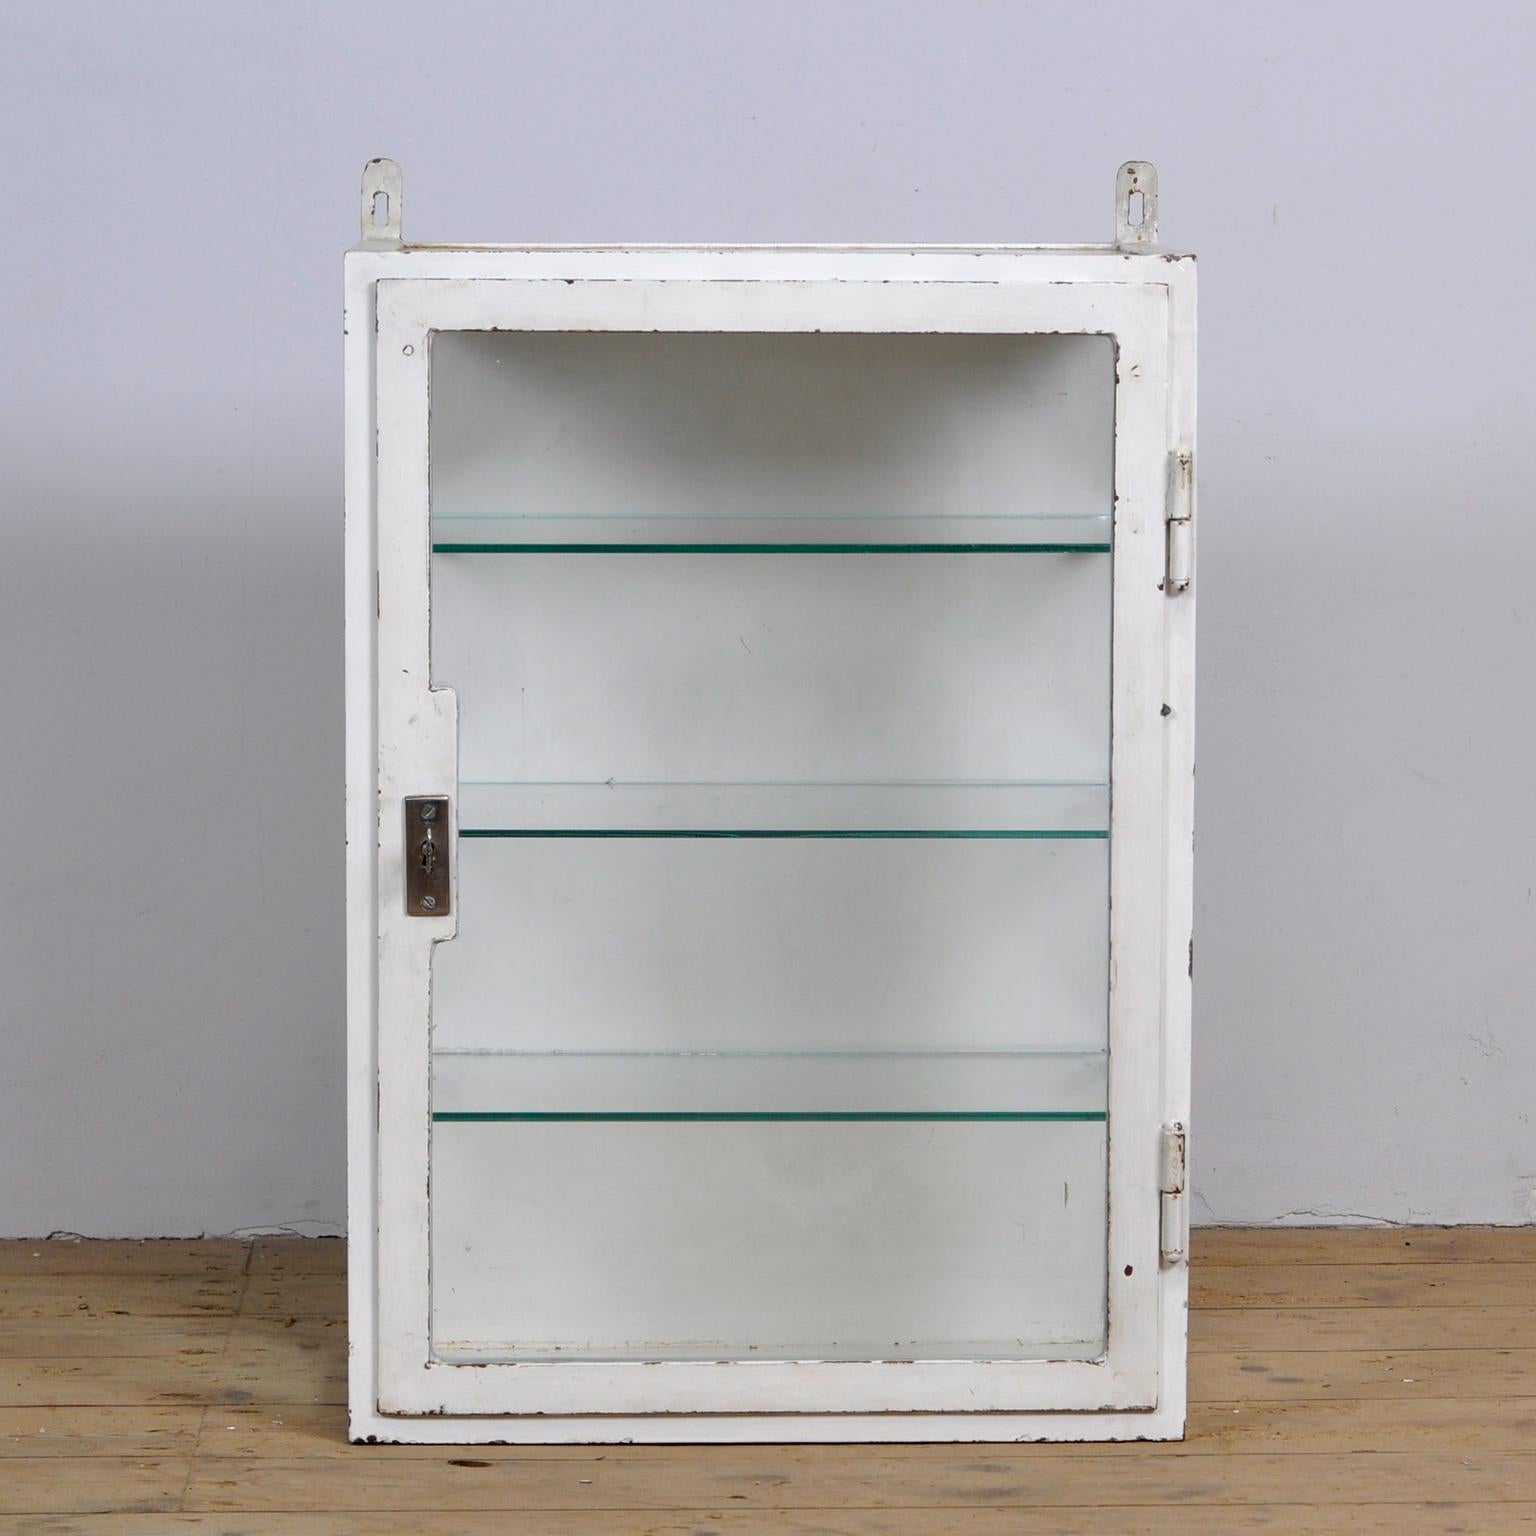 Medical cabinet from the 1930s. The cabinet (wall unit) was produced in Hungary and is made of thick iron and glass. From a hospital in Budapest.